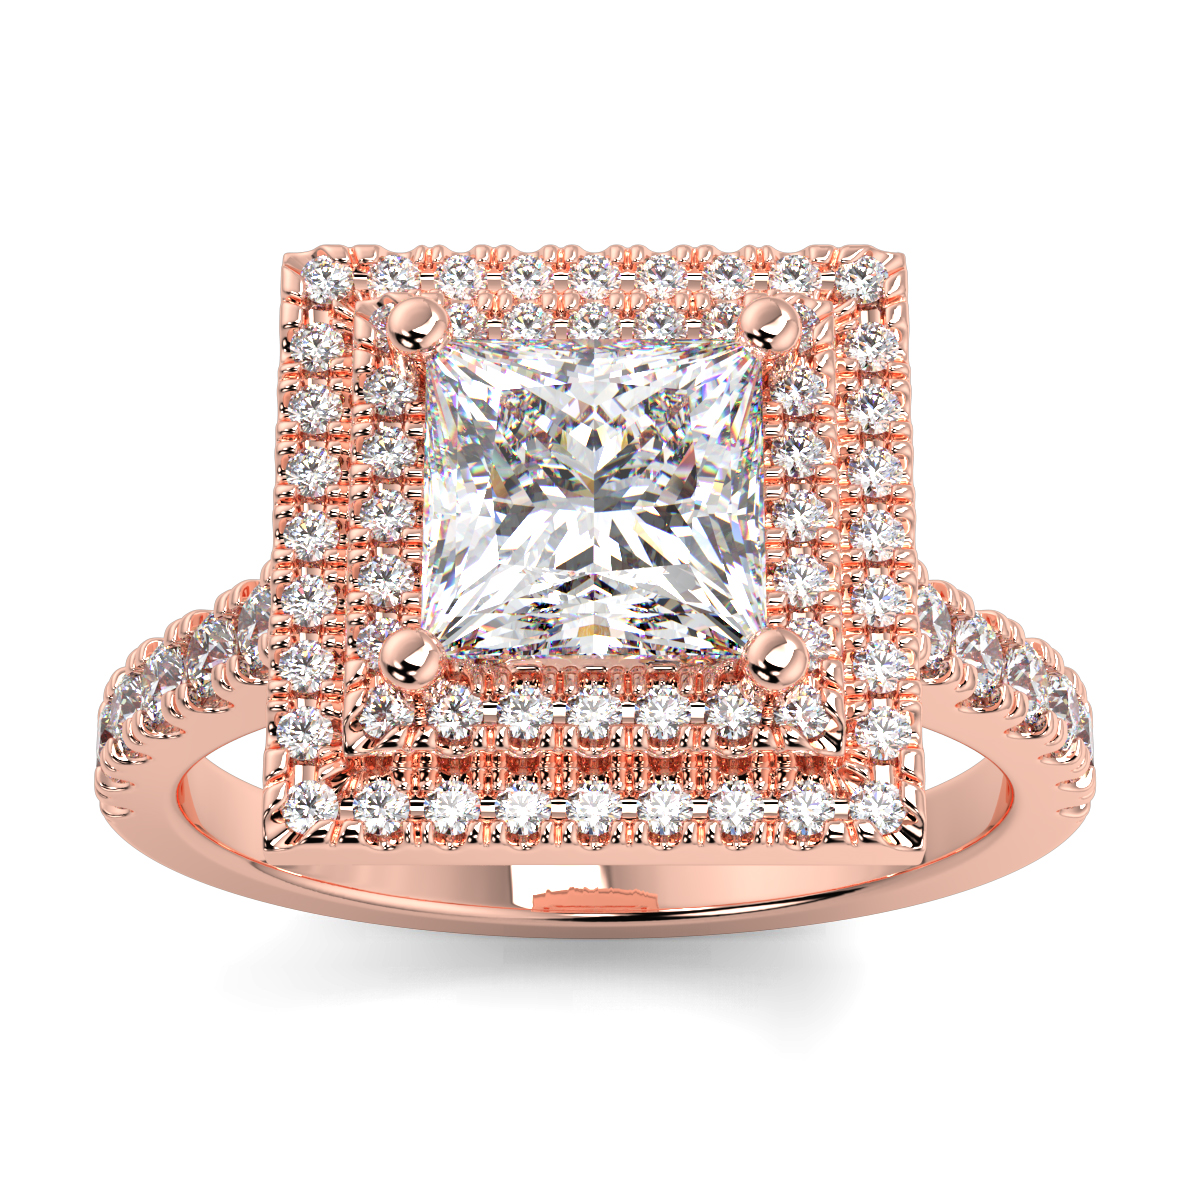 Princess Double Halo With Shoulder Diamond Ring